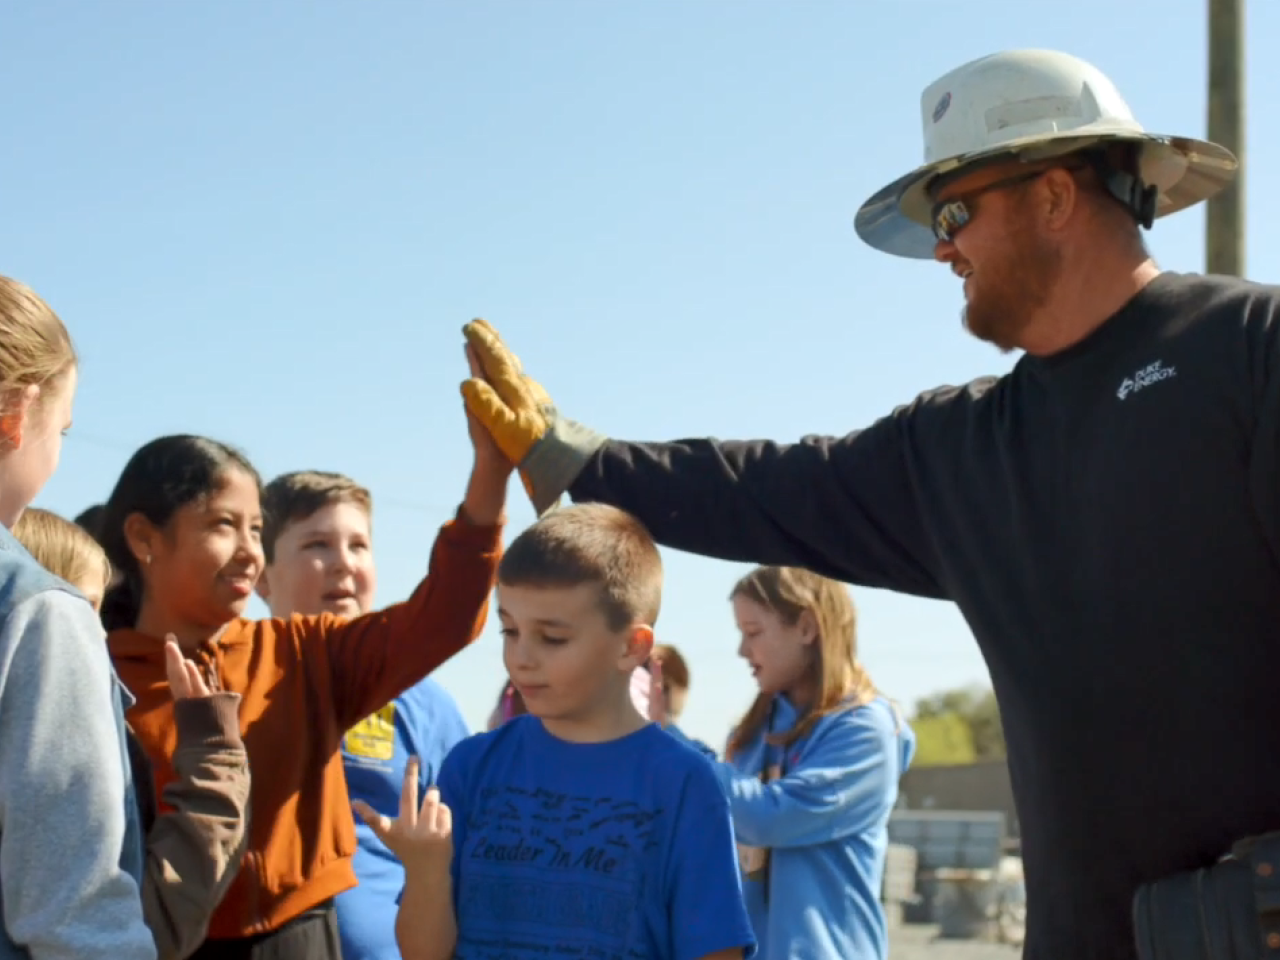 An employee in a hard hat gives a high five to a child.